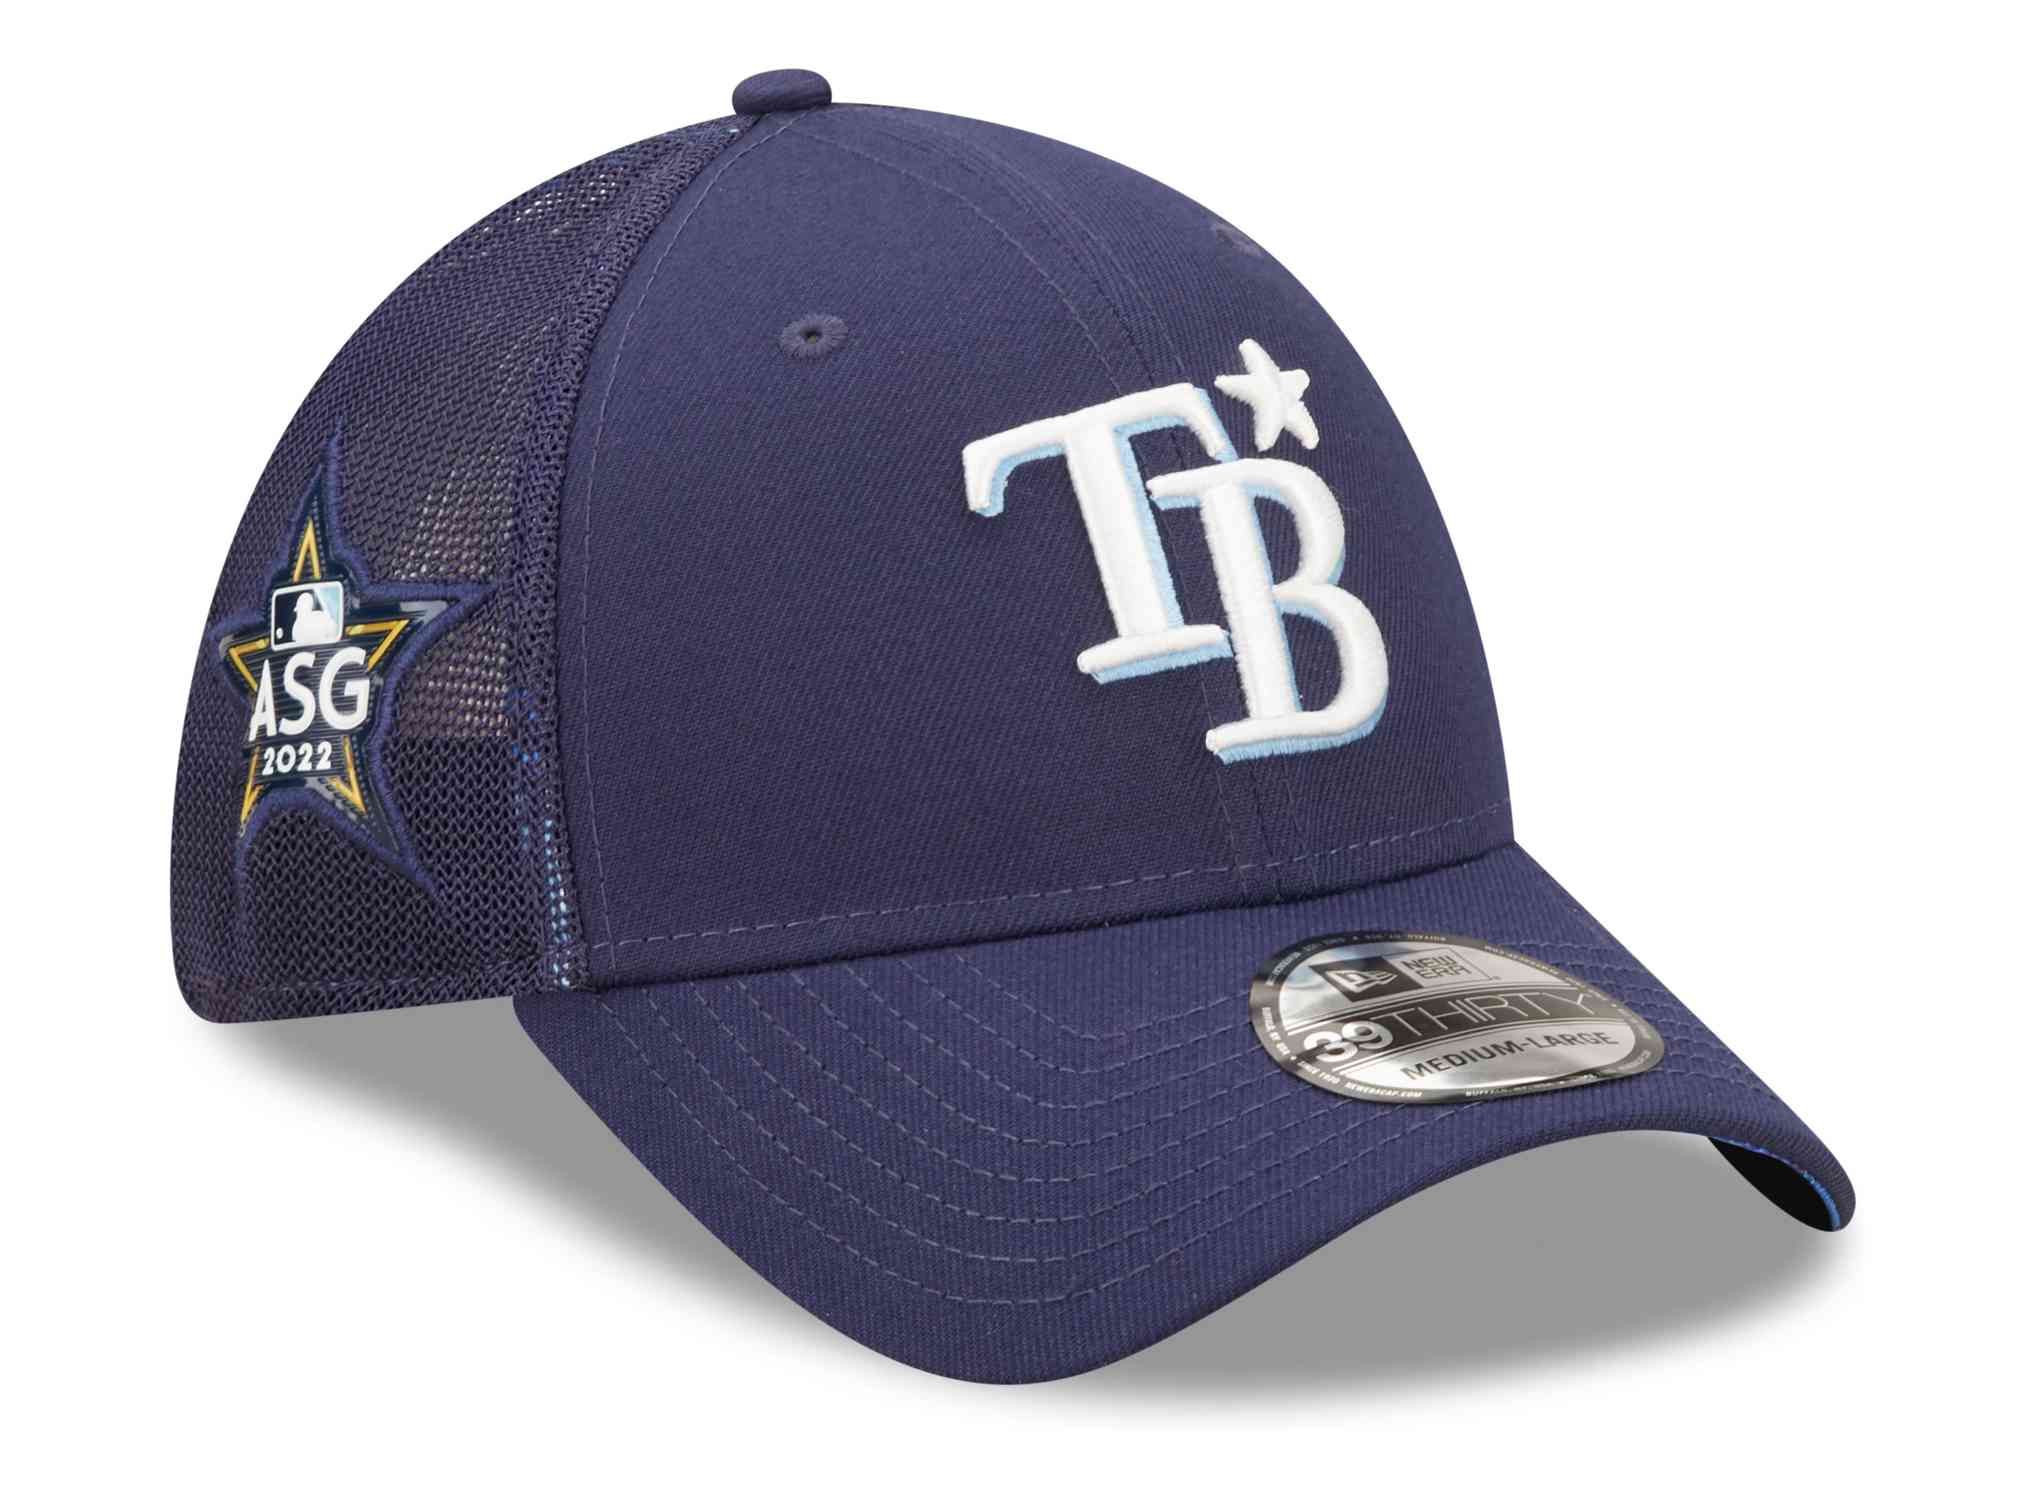 New Era - MLB Tampa Bay Rays All Star Game Patch 39Thirty